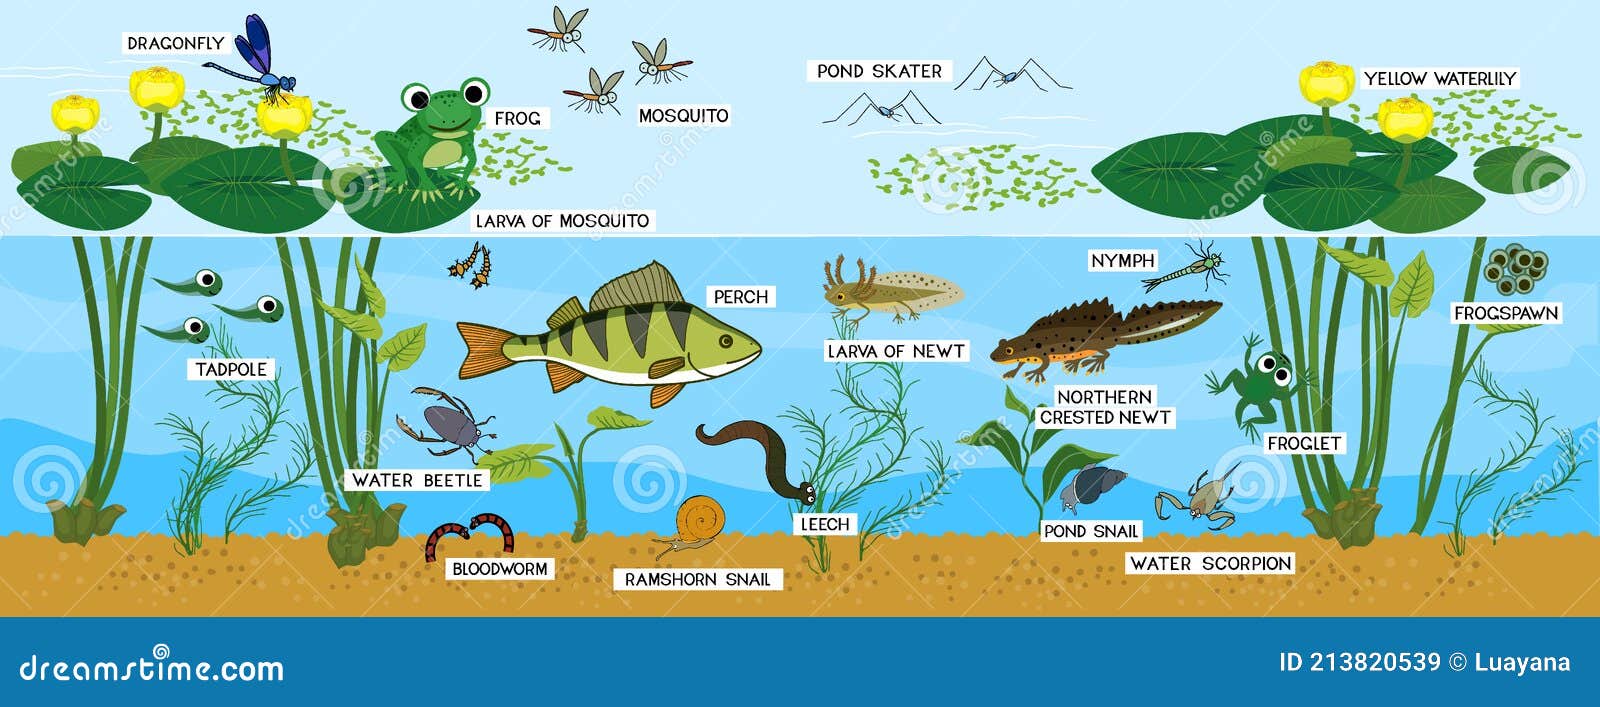 Pond Food Web | Consumers, Decomposers & Producers - Lesson | Study.com